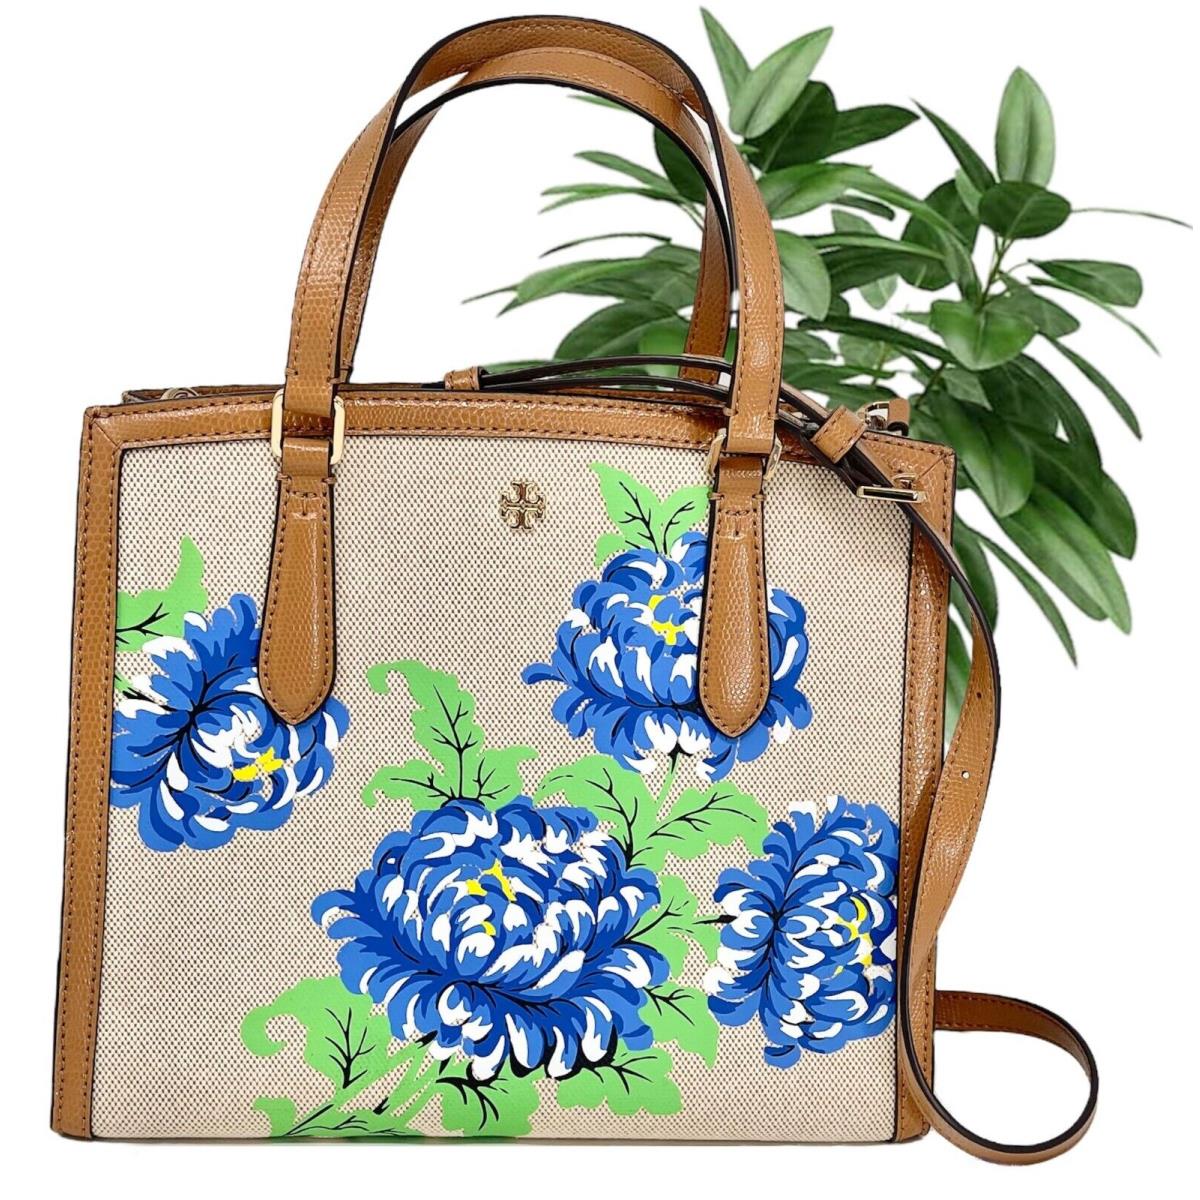 Tory Burch Emerson Ditsy Floral Canvas Structured Work Satchel